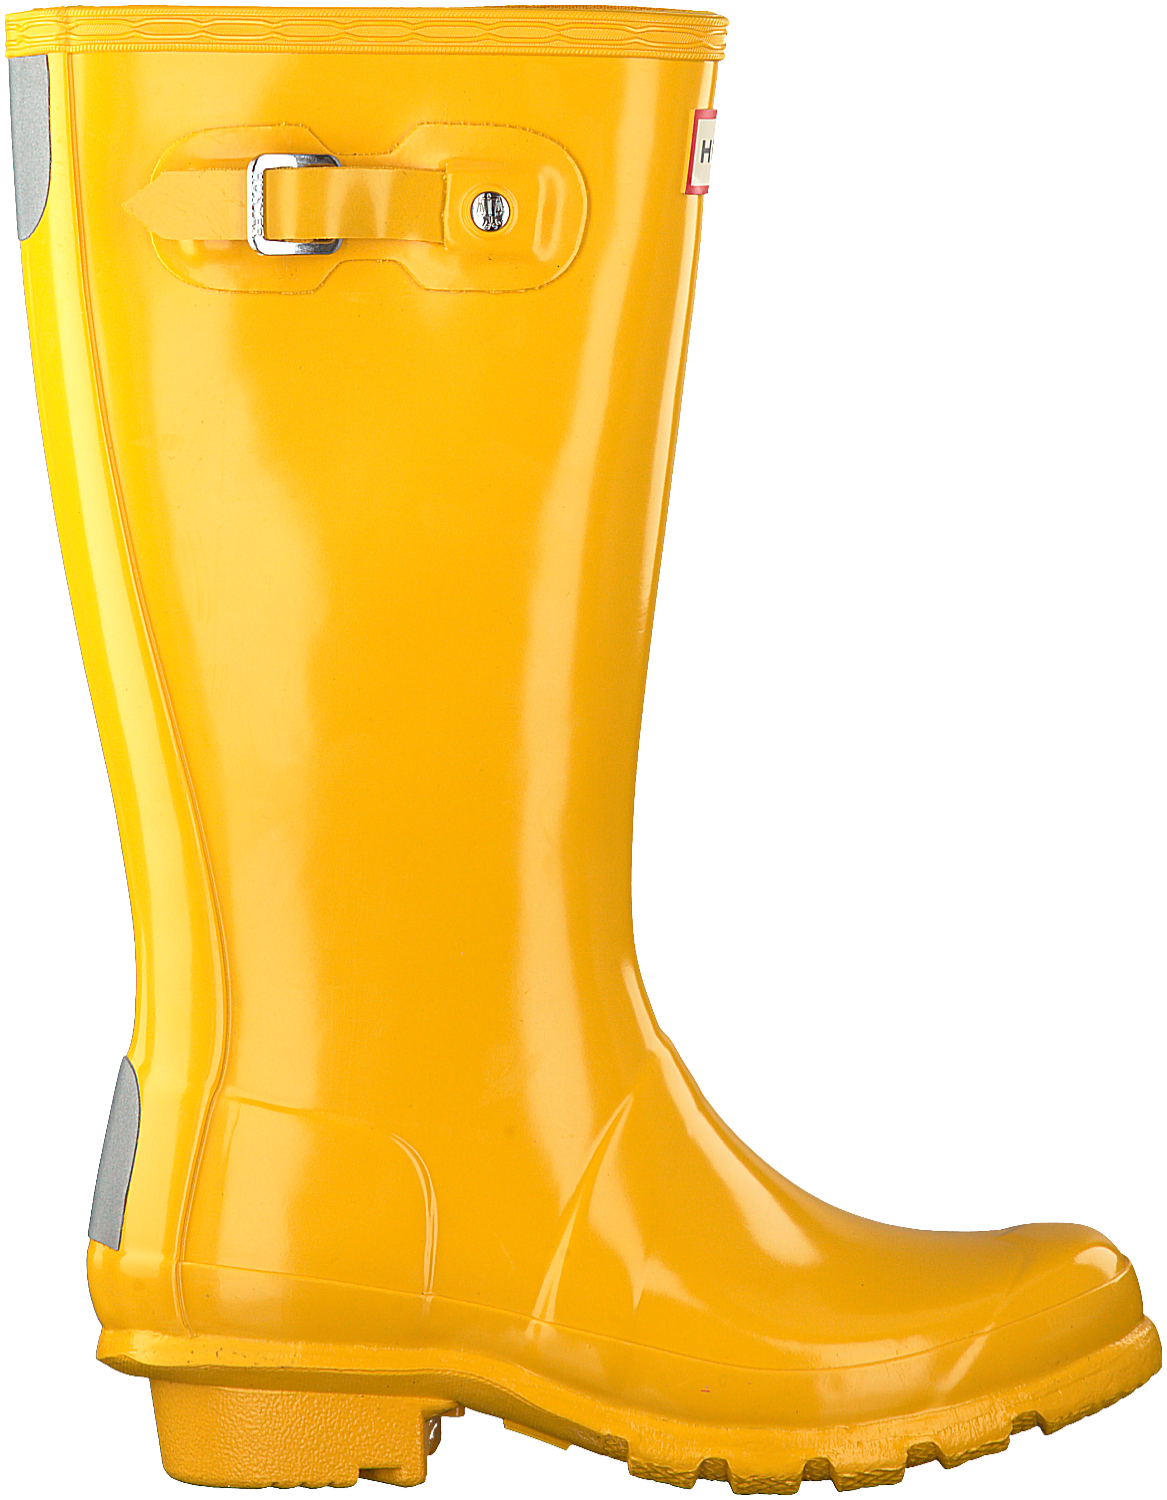 Rubber boots PNG transparent image download, size: 1167x1500px